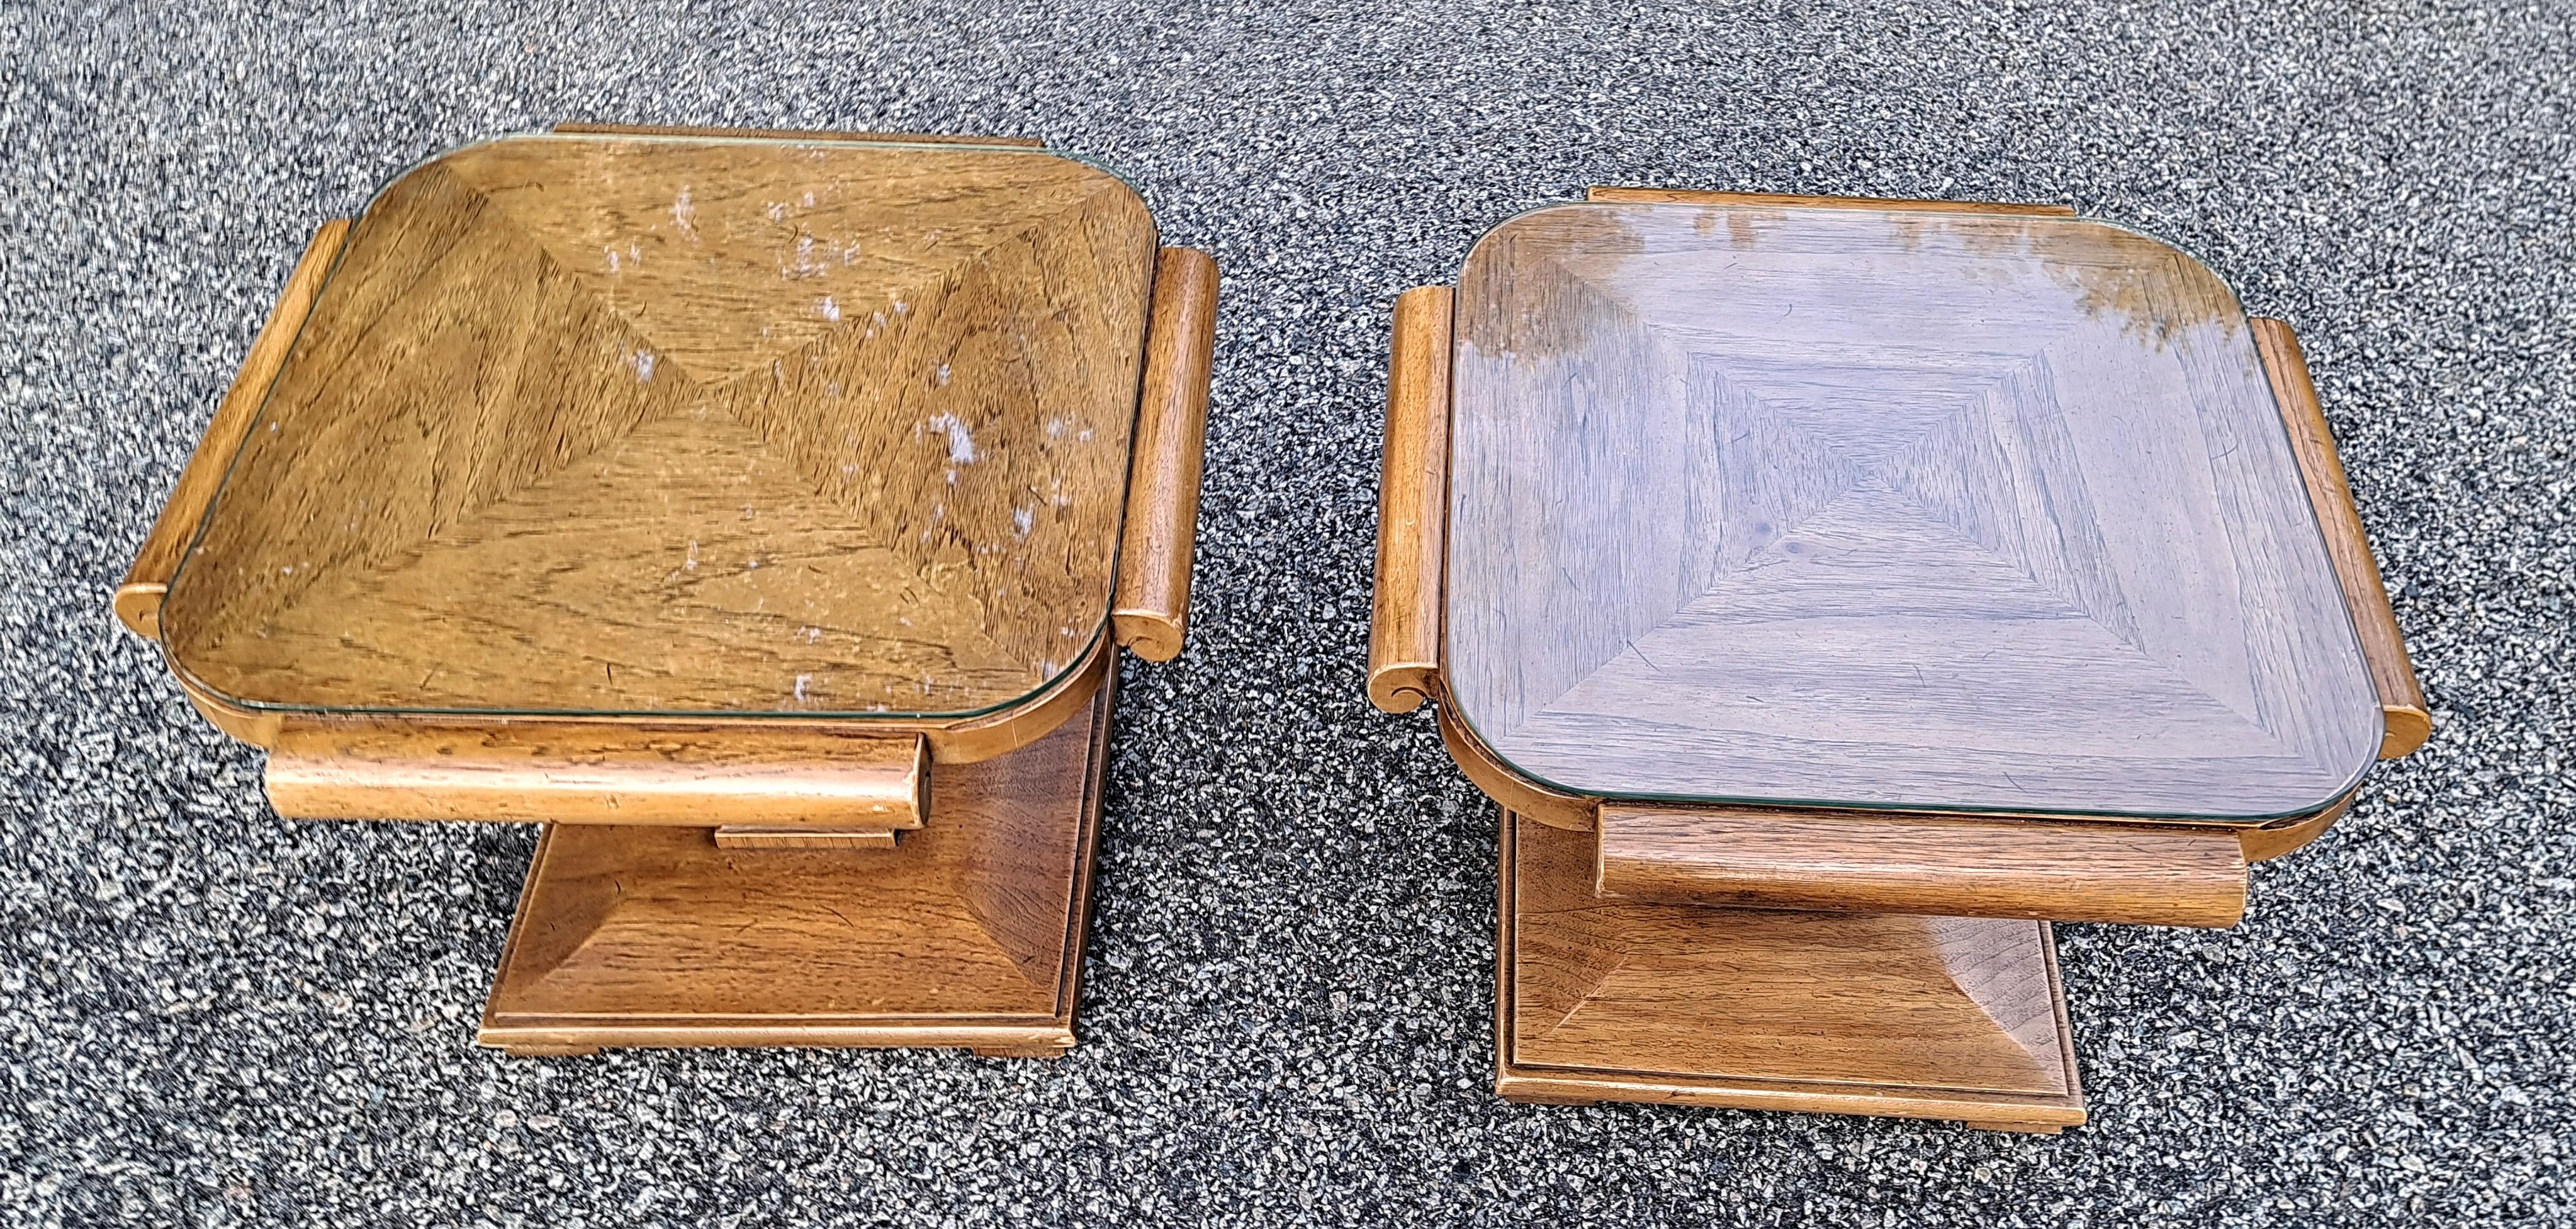 Pair of Thomasville Hollywood Regency French Provincial style side/end tables with custom glass covers, carved scrolled edges  and pedestal base.